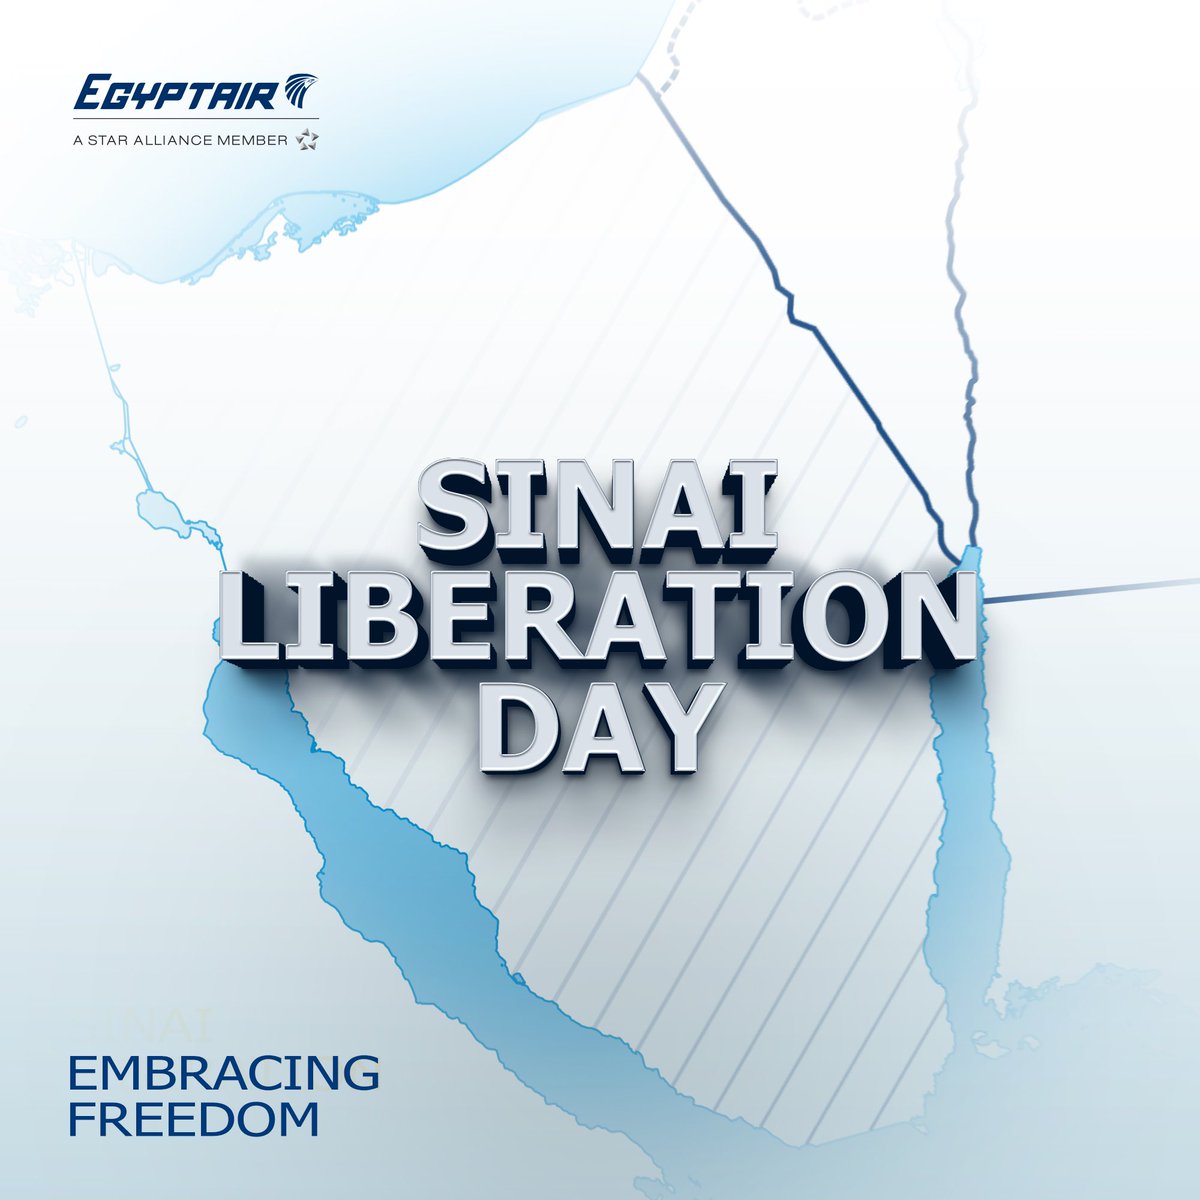 Marking Sinai Liberation: Celebrate with #EGYPTAIR as we honor the day of freedom and unity. Join us in commemorating this historic event!